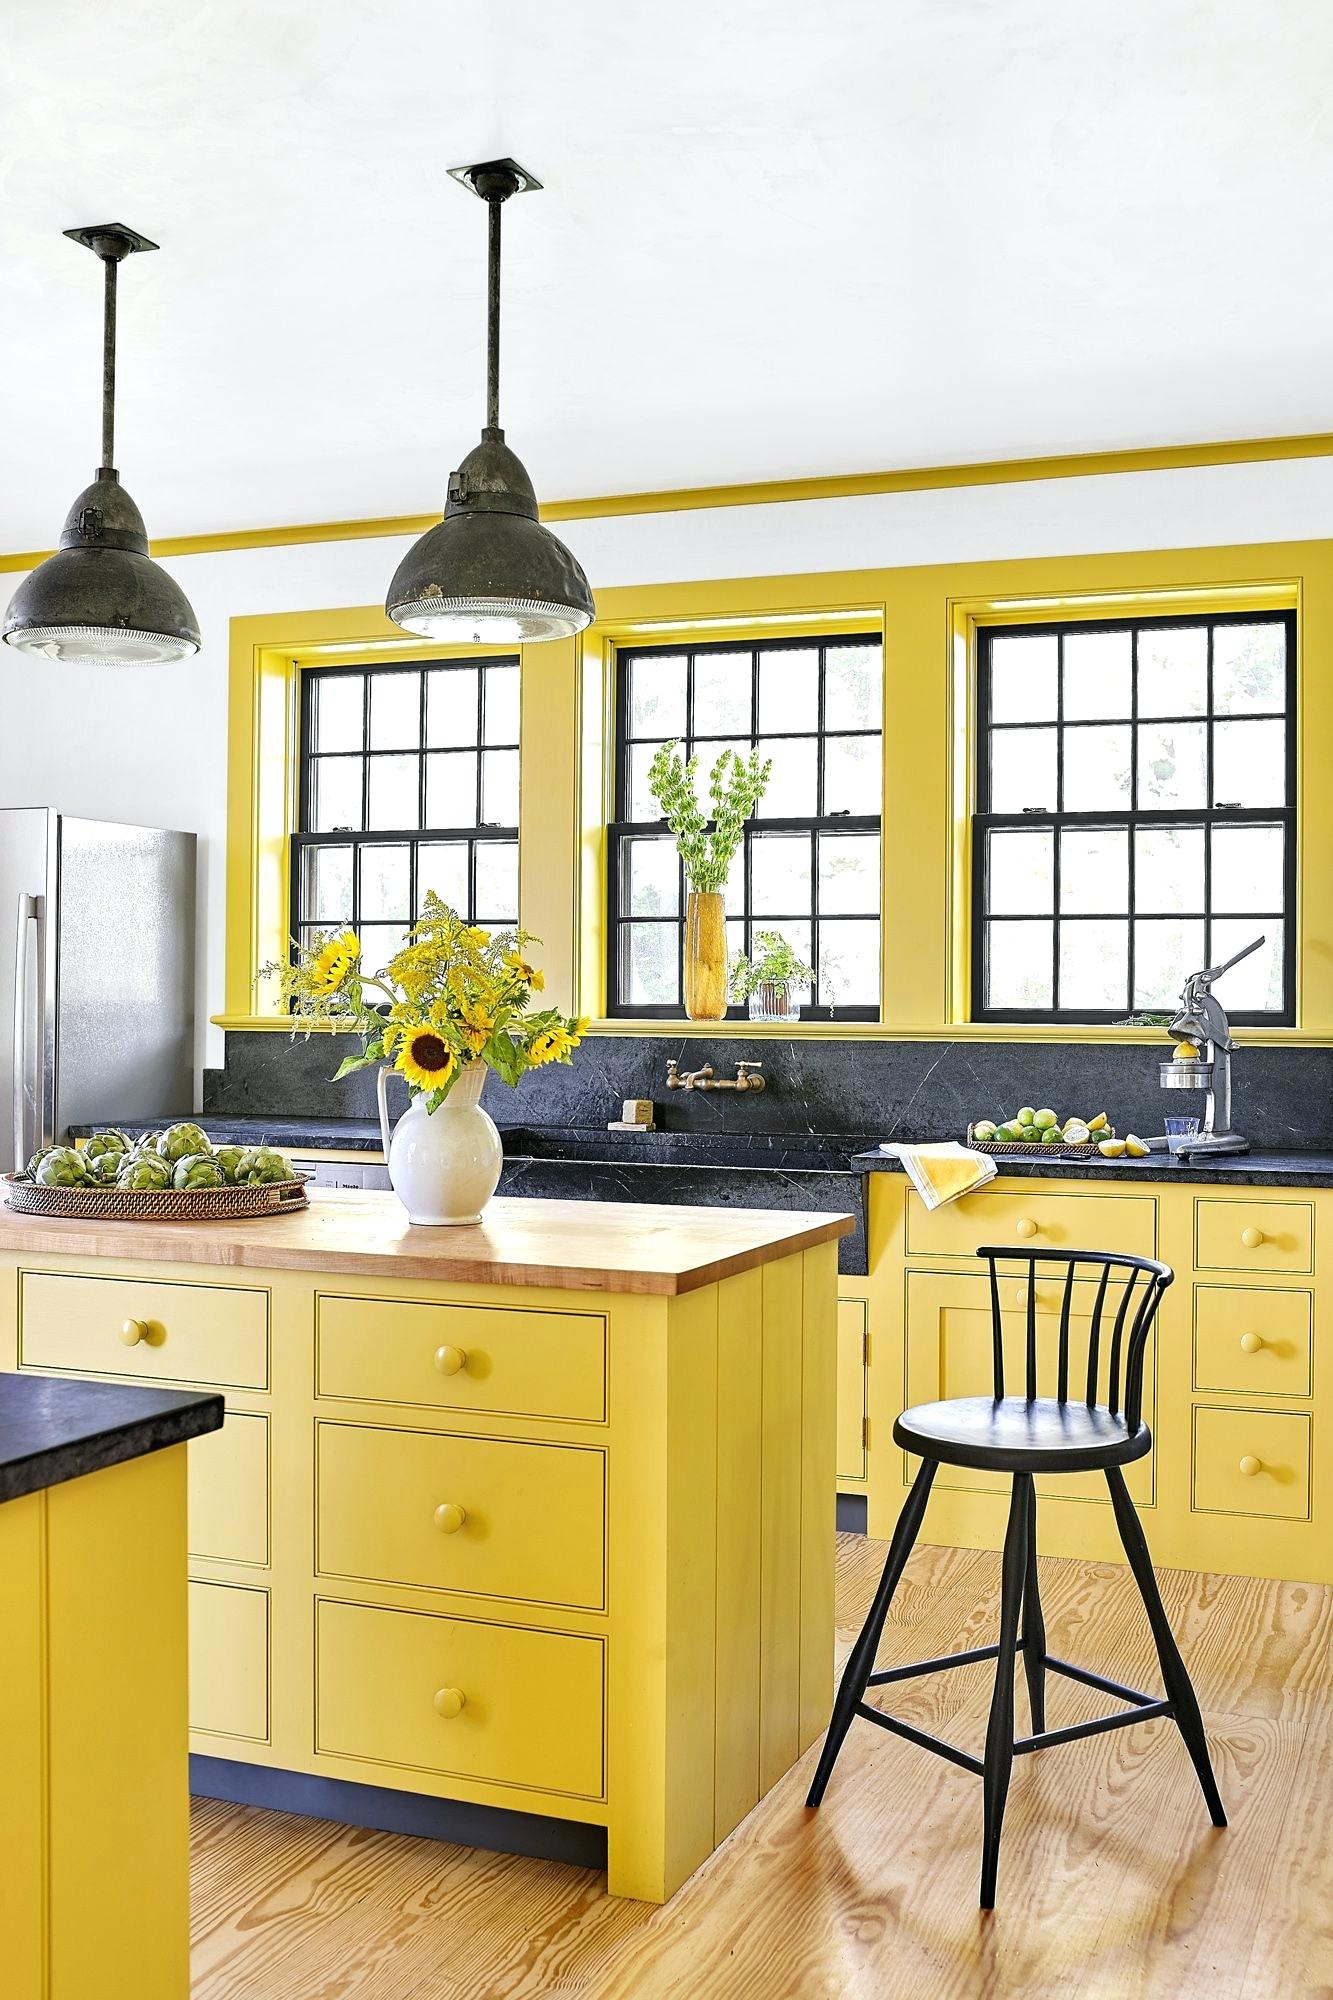 Snug - Decorate A Yellow Kitchen , HD Wallpaper & Backgrounds